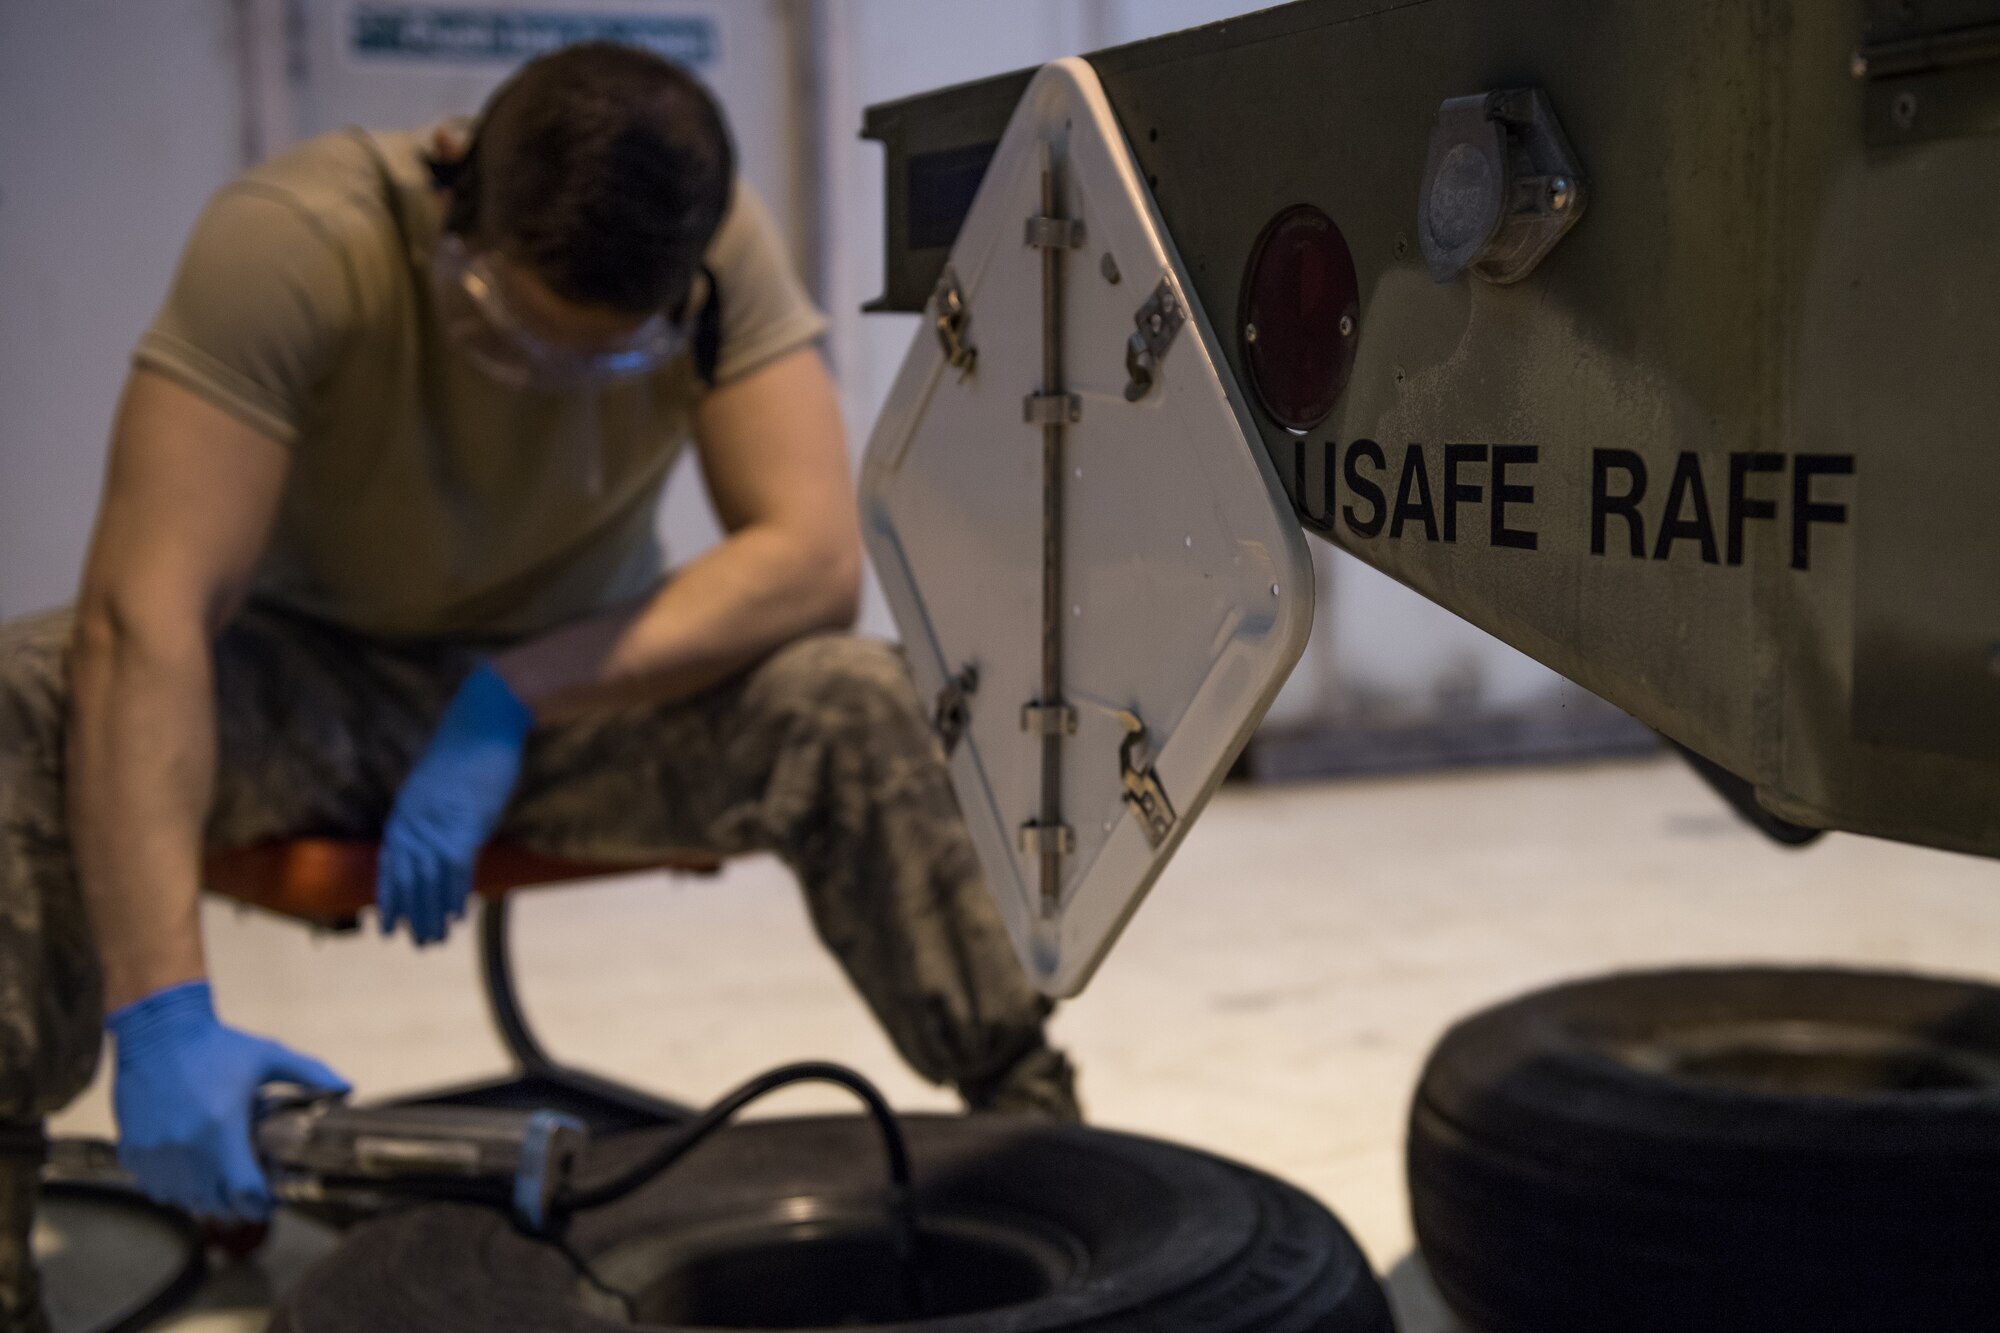 Airman 1st Class Carson Rinaldi, 2nd Munitions Squadron conventional maintenance crew chief, inflates a tire for a MHU-110 munitions trailer at RAF Fairford, England, April 2, 2019. These trailers are used to transport munitions to aircraft. (U.S. Air Force photo by Airman 1st Class Tessa B. Corrick)